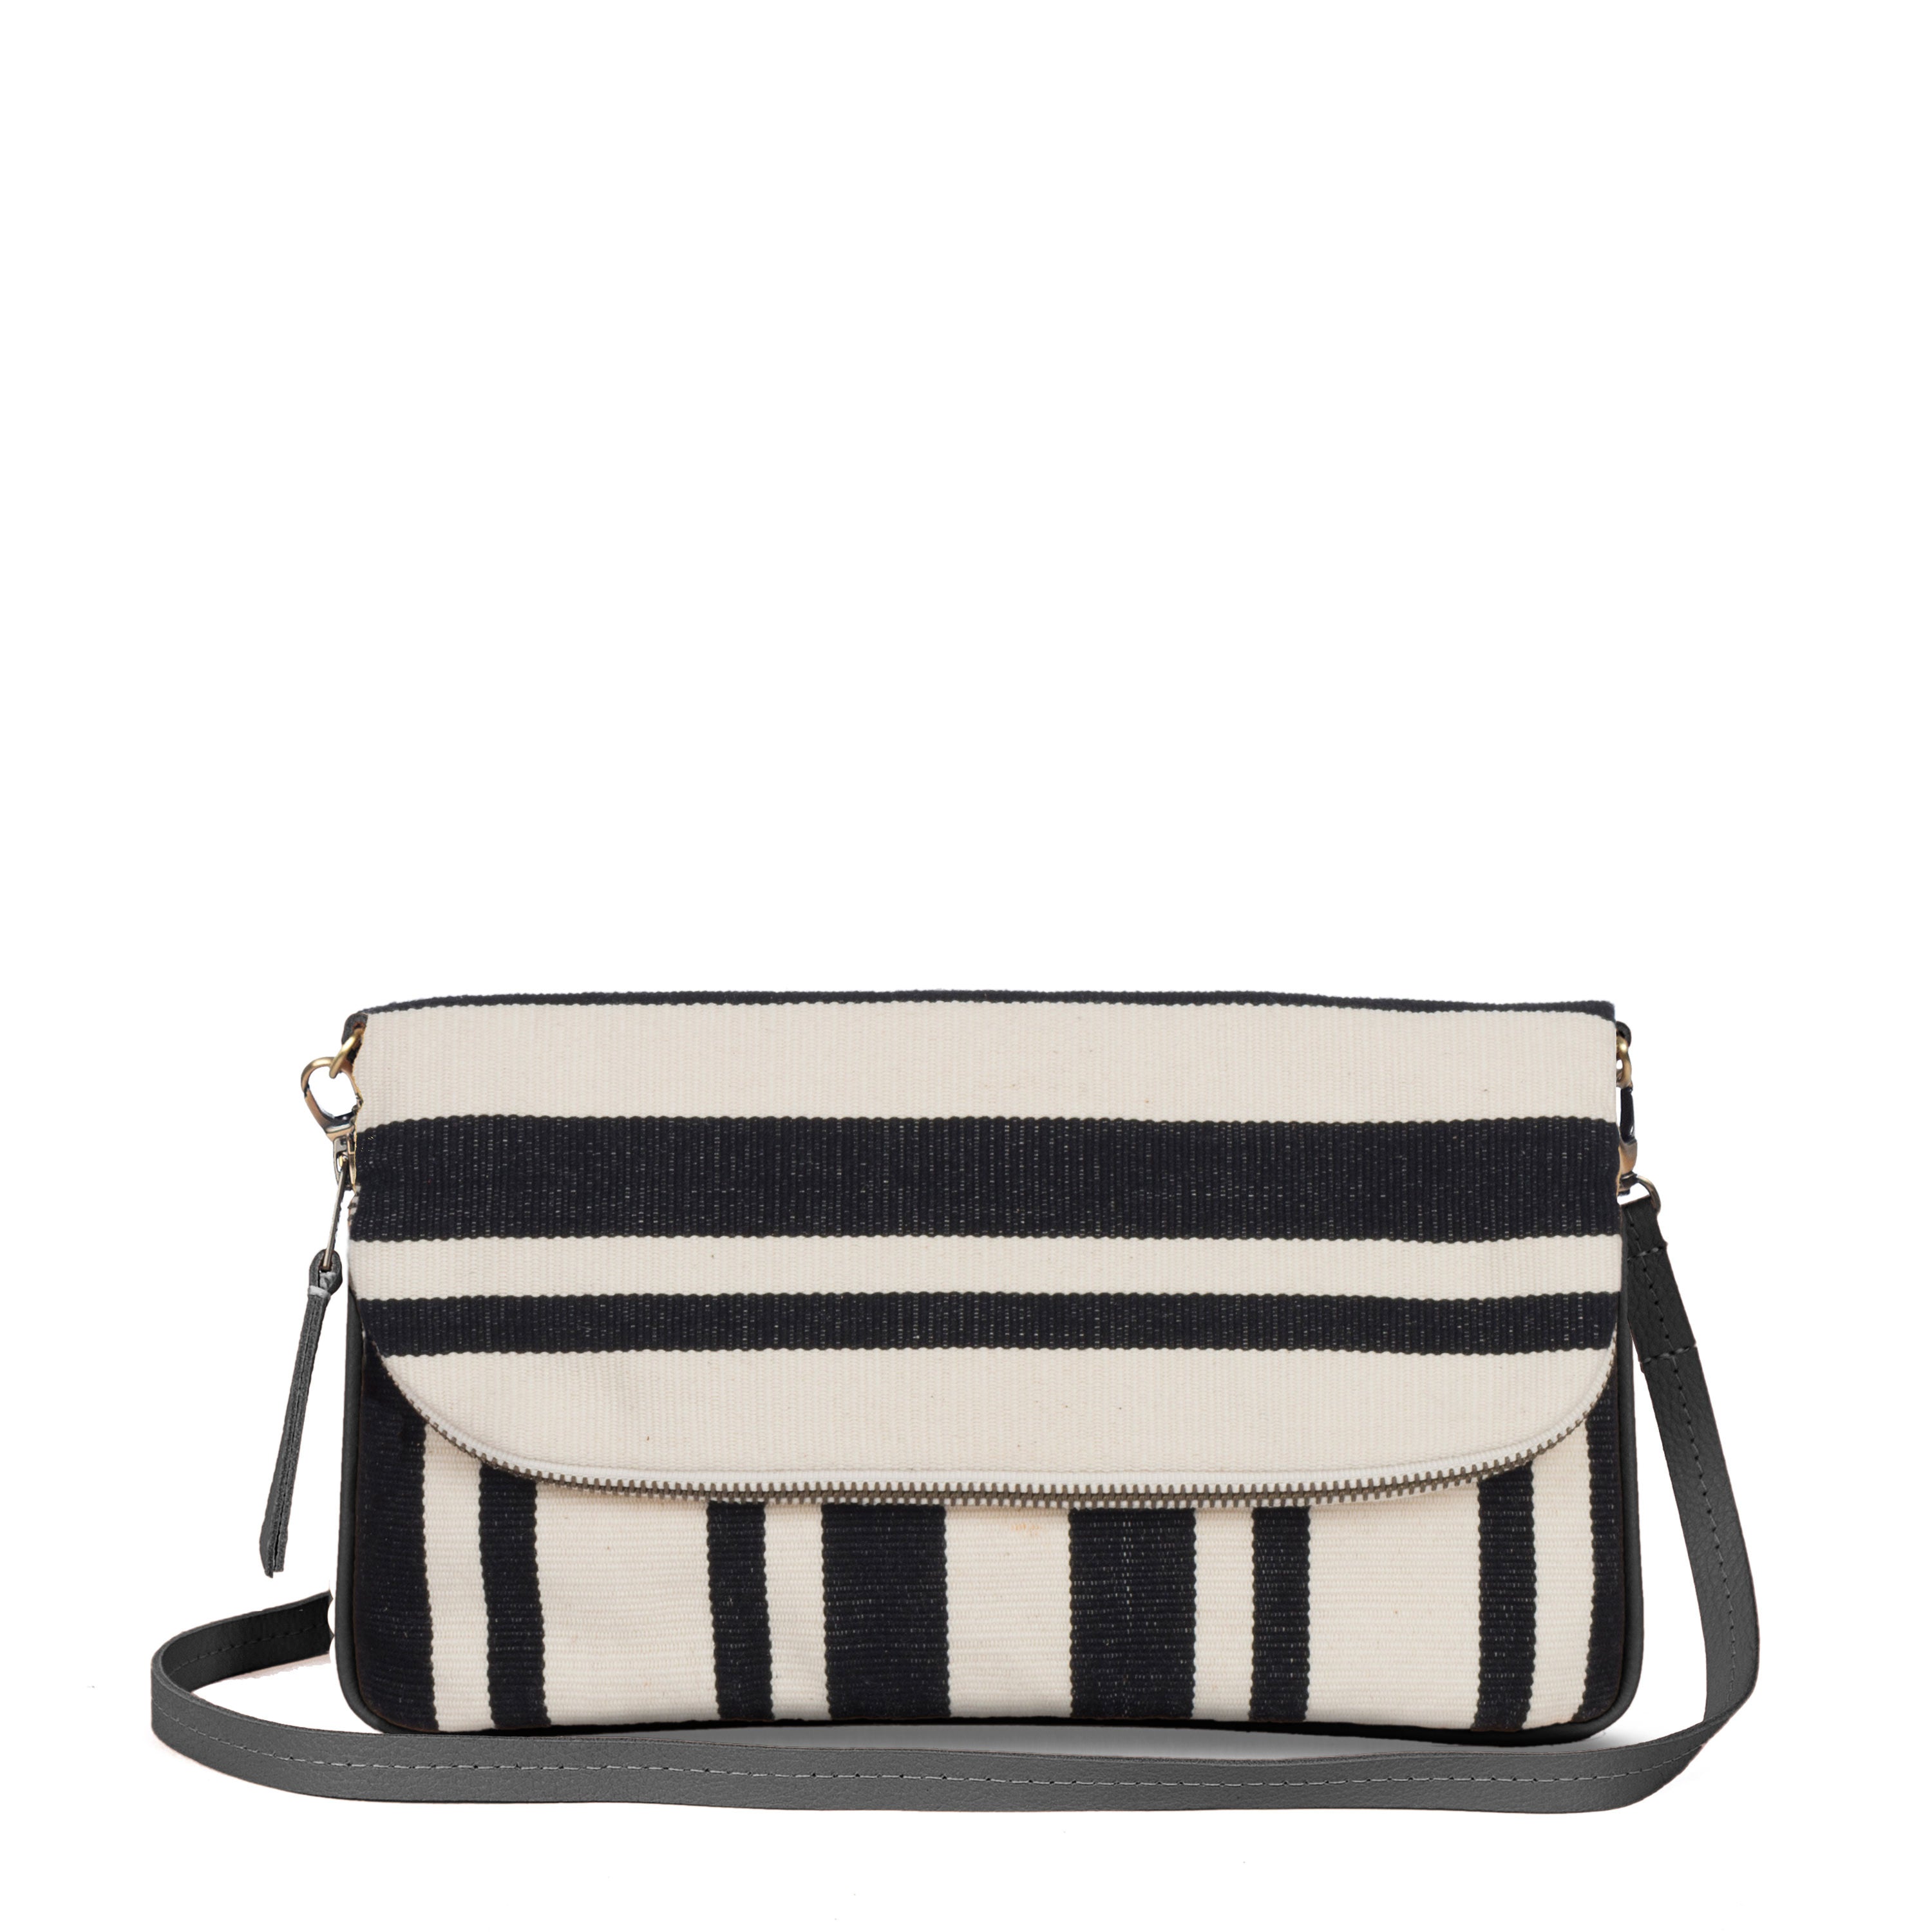 Paulina Artisan Handwoven Crossbody-To-Clutch Black Block Stripe. The pattern has vertical and horizontal black and white stripes. It has a grey detachable leather strap and a mini leather zipper pull.